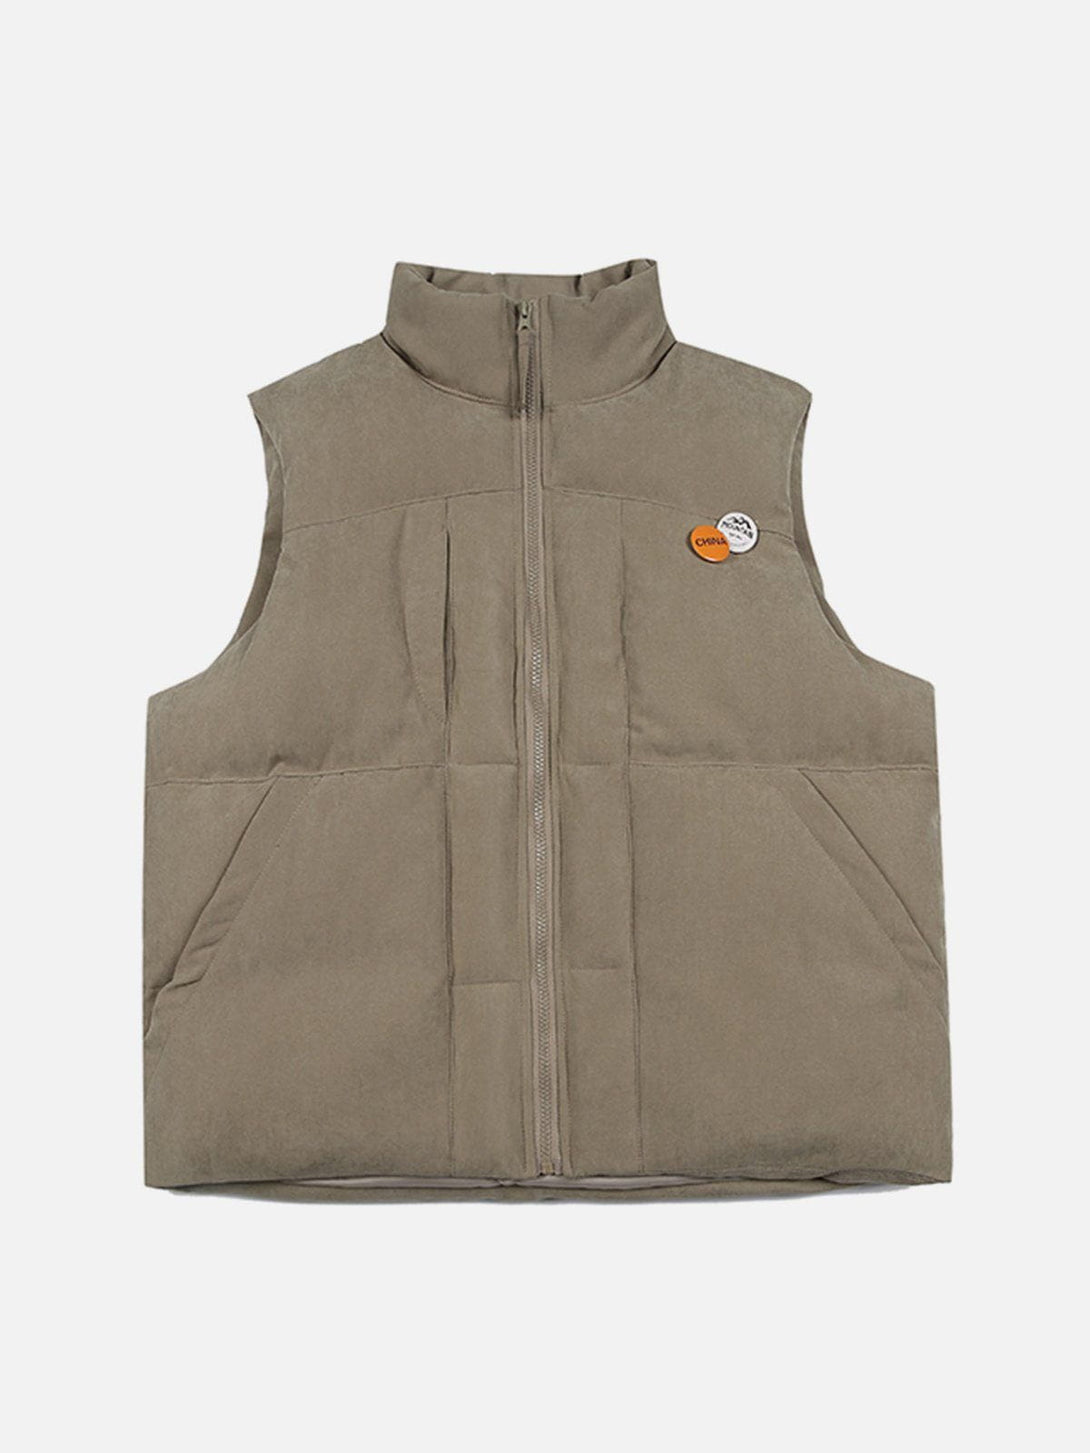 Levefly - Solid Color Stand Gilet - Streetwear Fashion - levefly.com